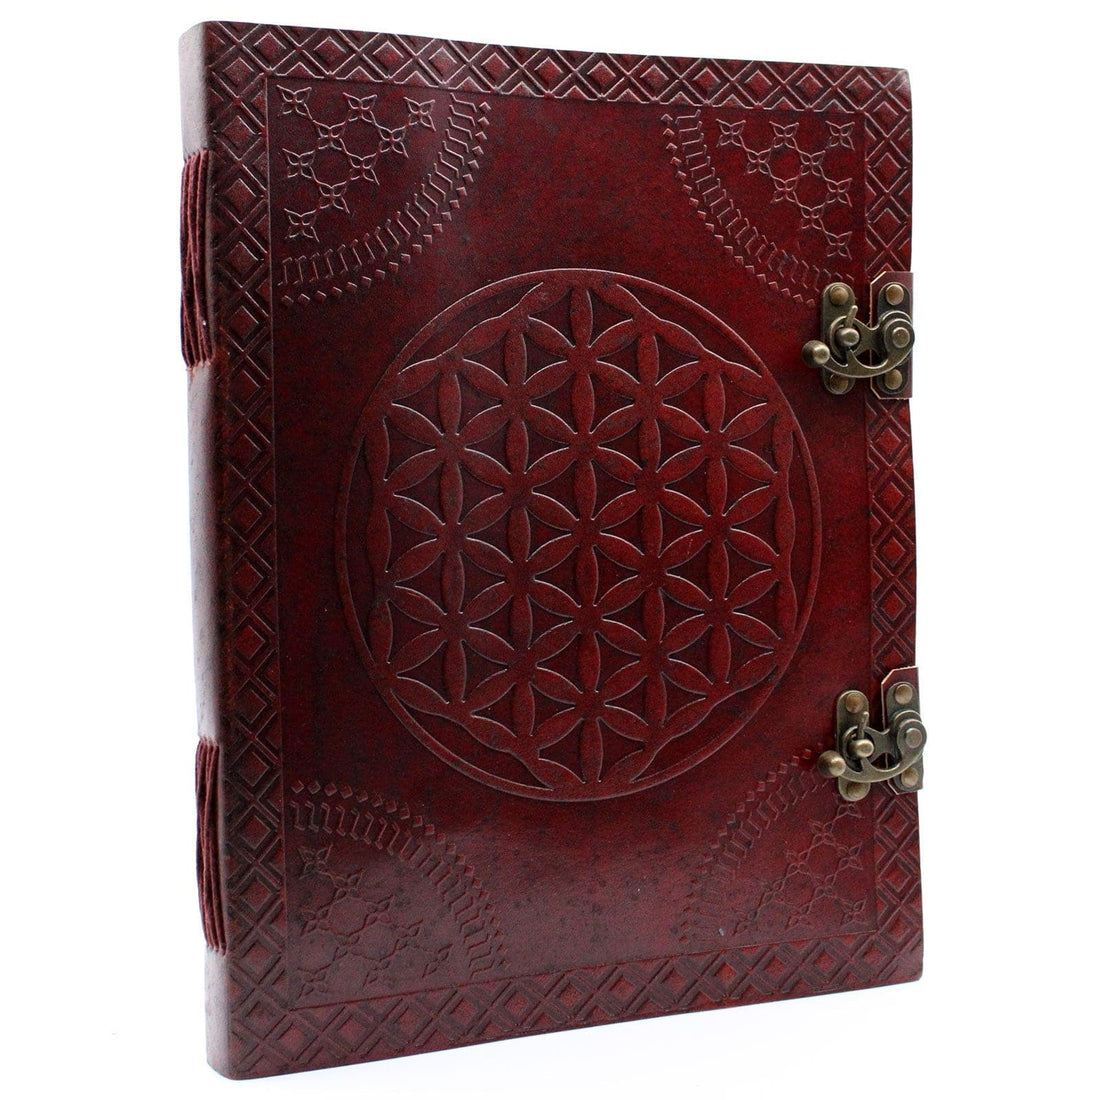 Huge Flower of Life Leather Book 10x13 (200 pages) - best price from Maltashopper.com LBN-22